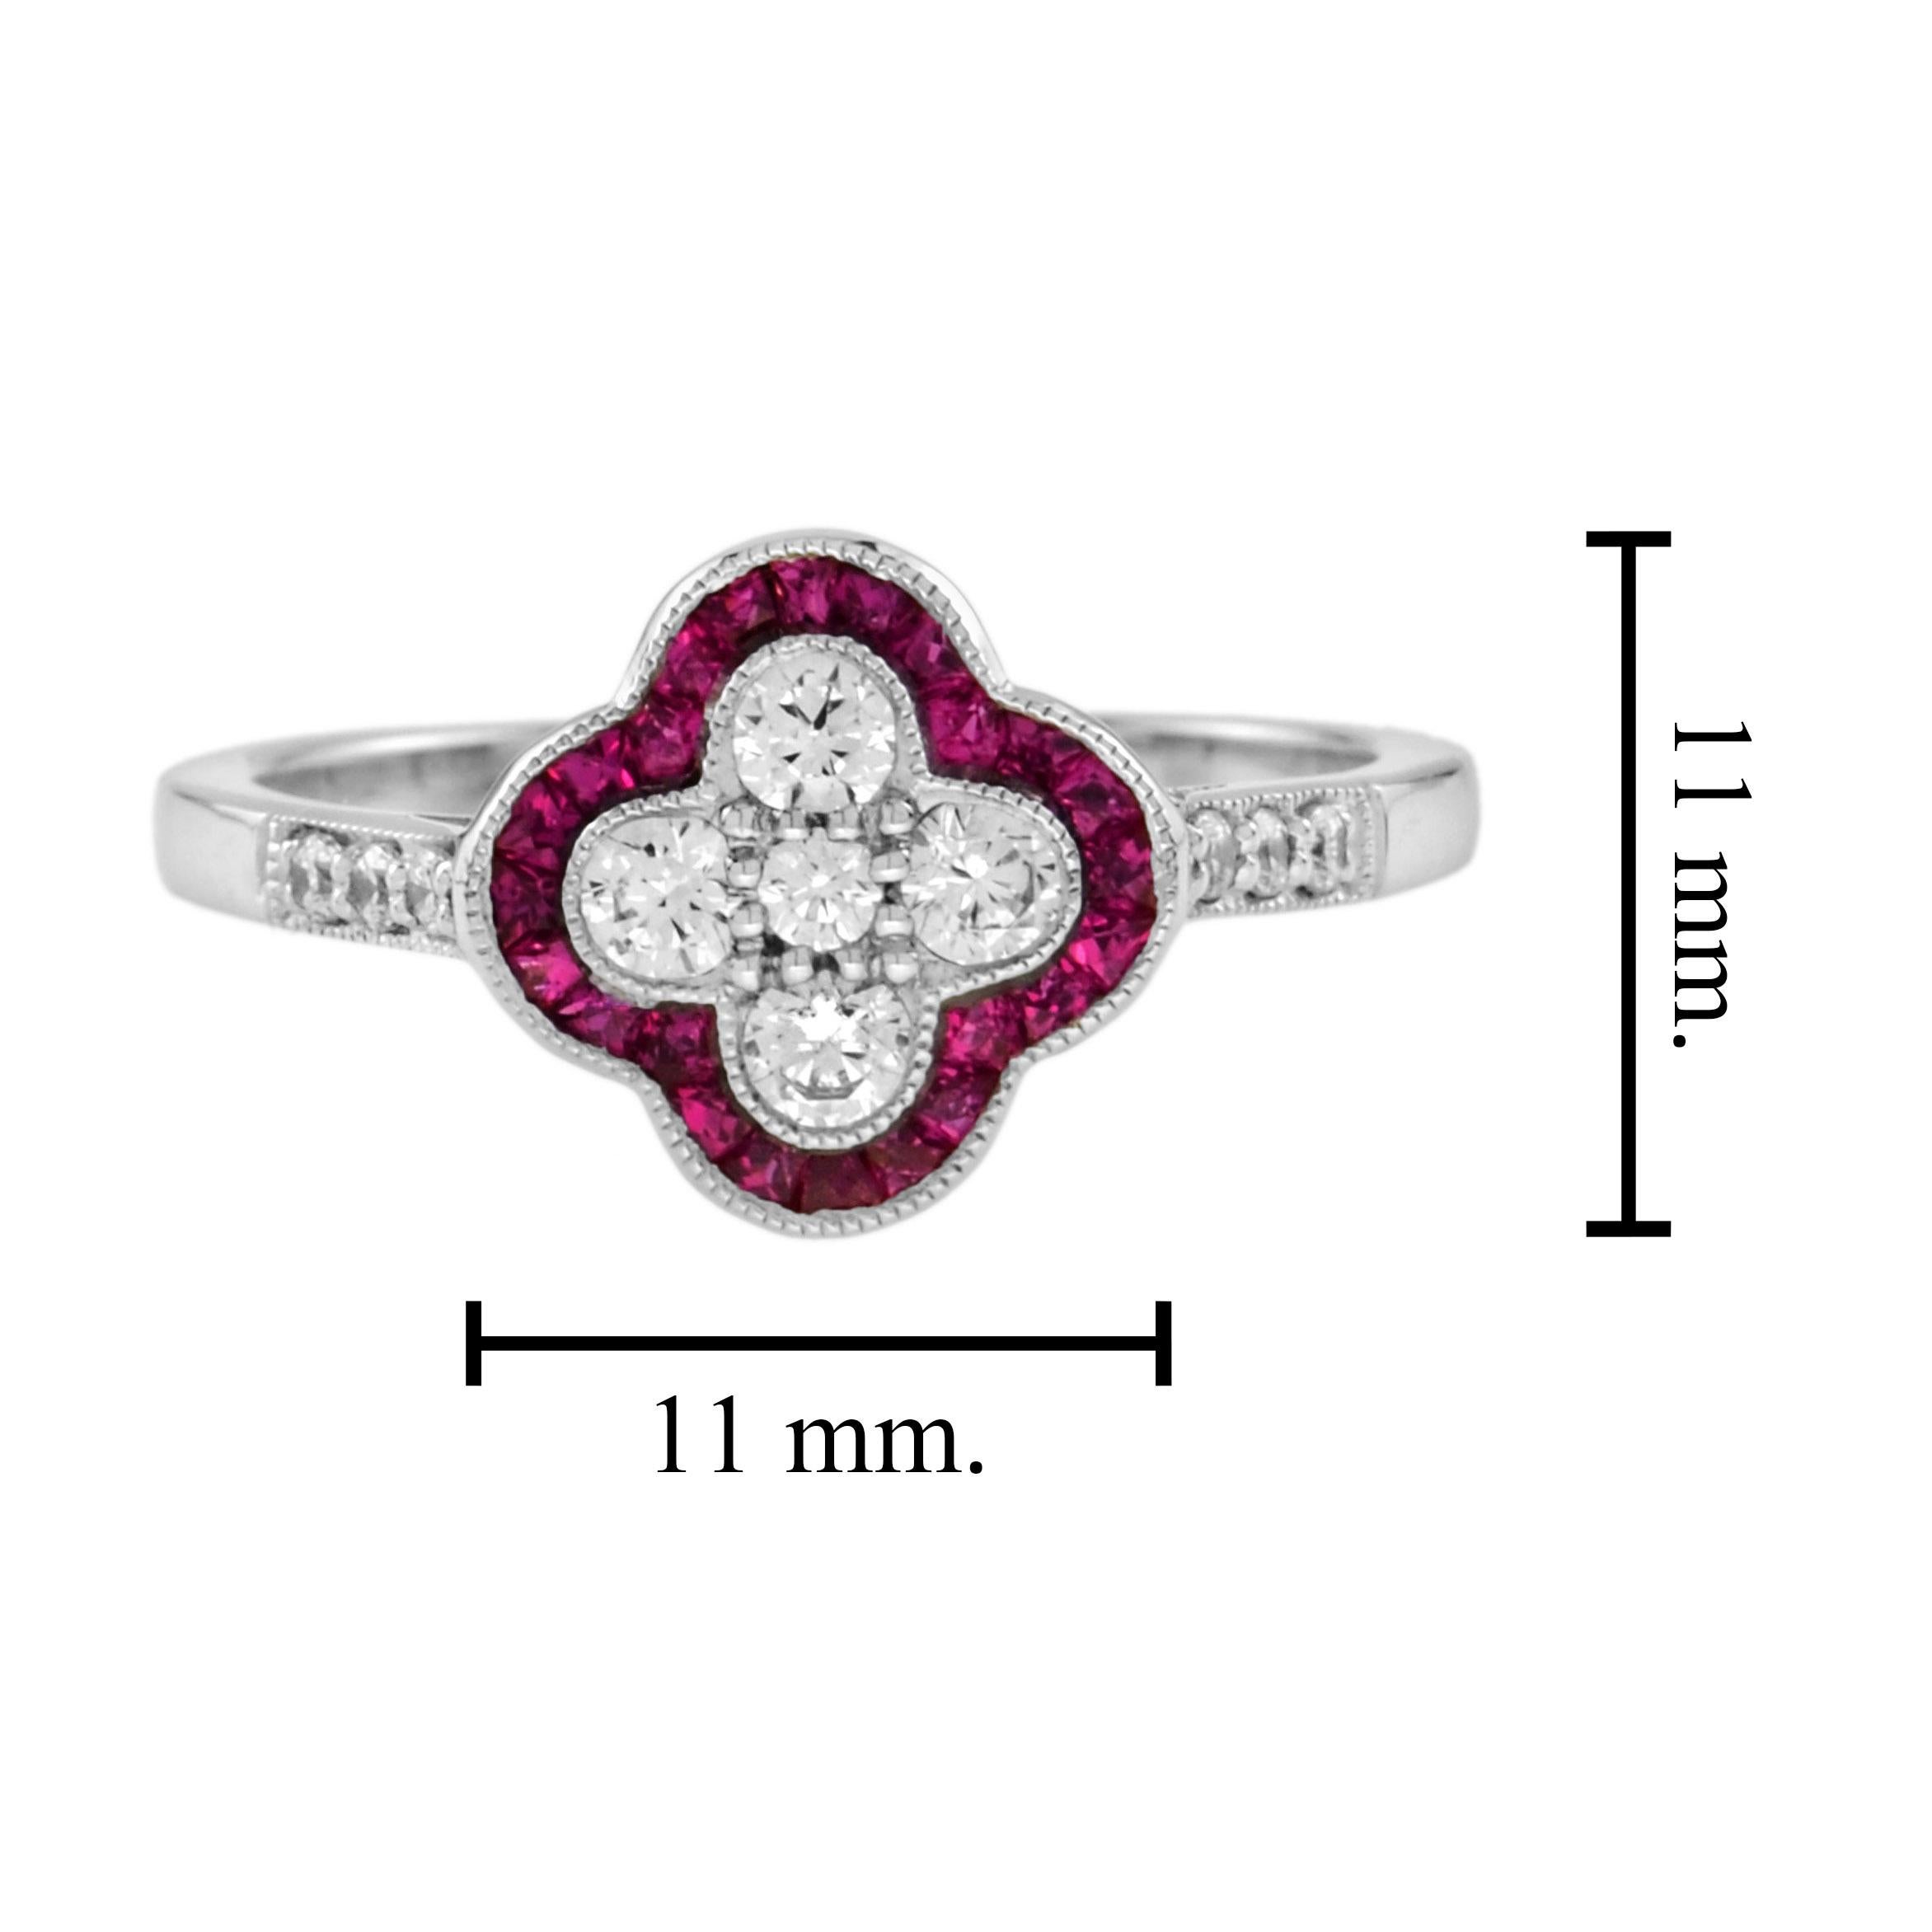 For Sale:  Diamond and Ruby Art Deco Style Floral Cluster Ring in 18K White Gold 6